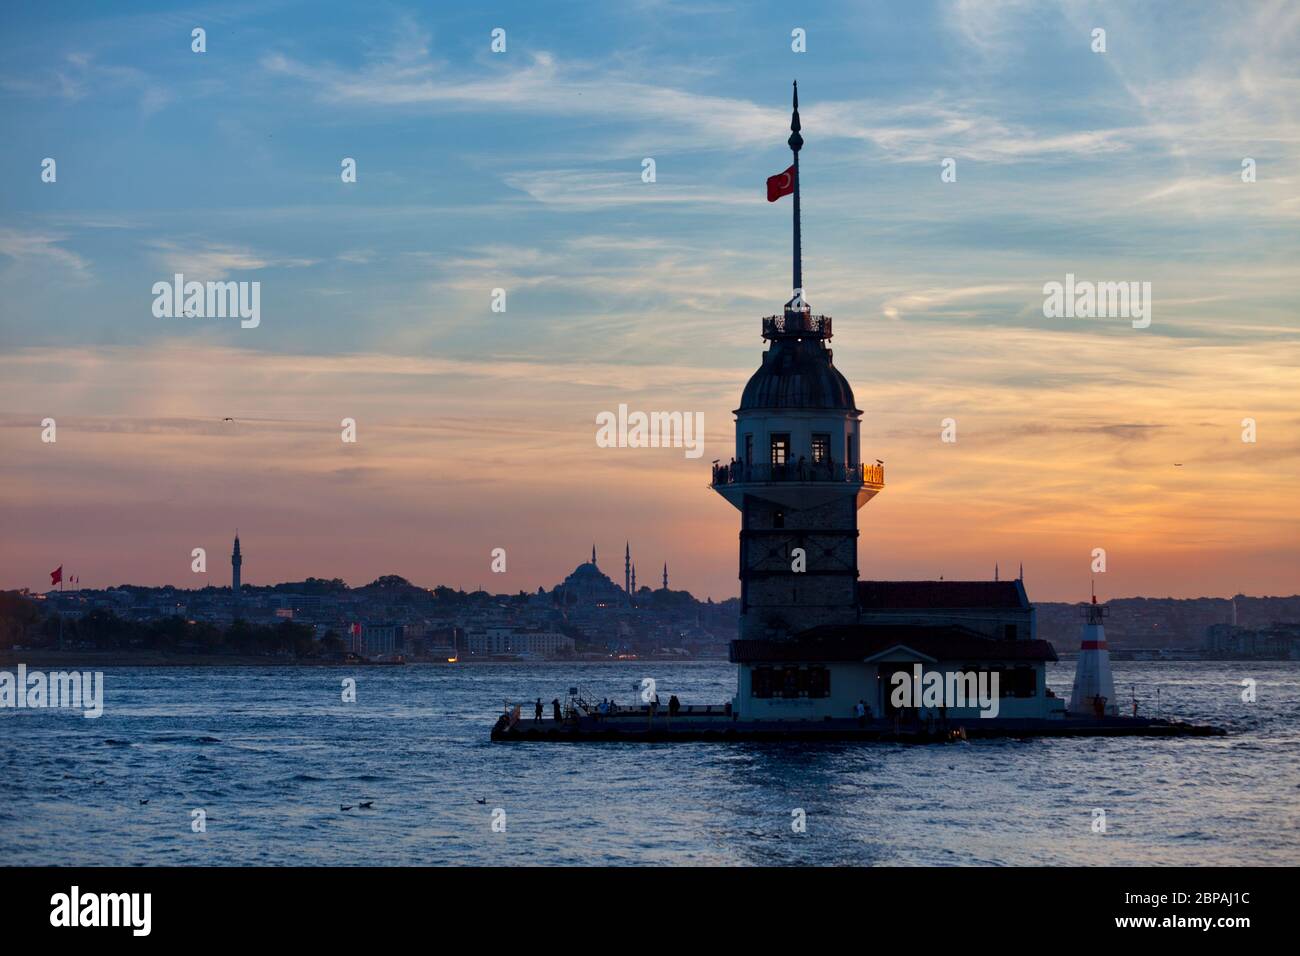 The Maiden's Tower, also known as Leander's Tower since the medieval Byzantine period, is a tower on a small islet in Istanbul, Turkey. Stock Photo